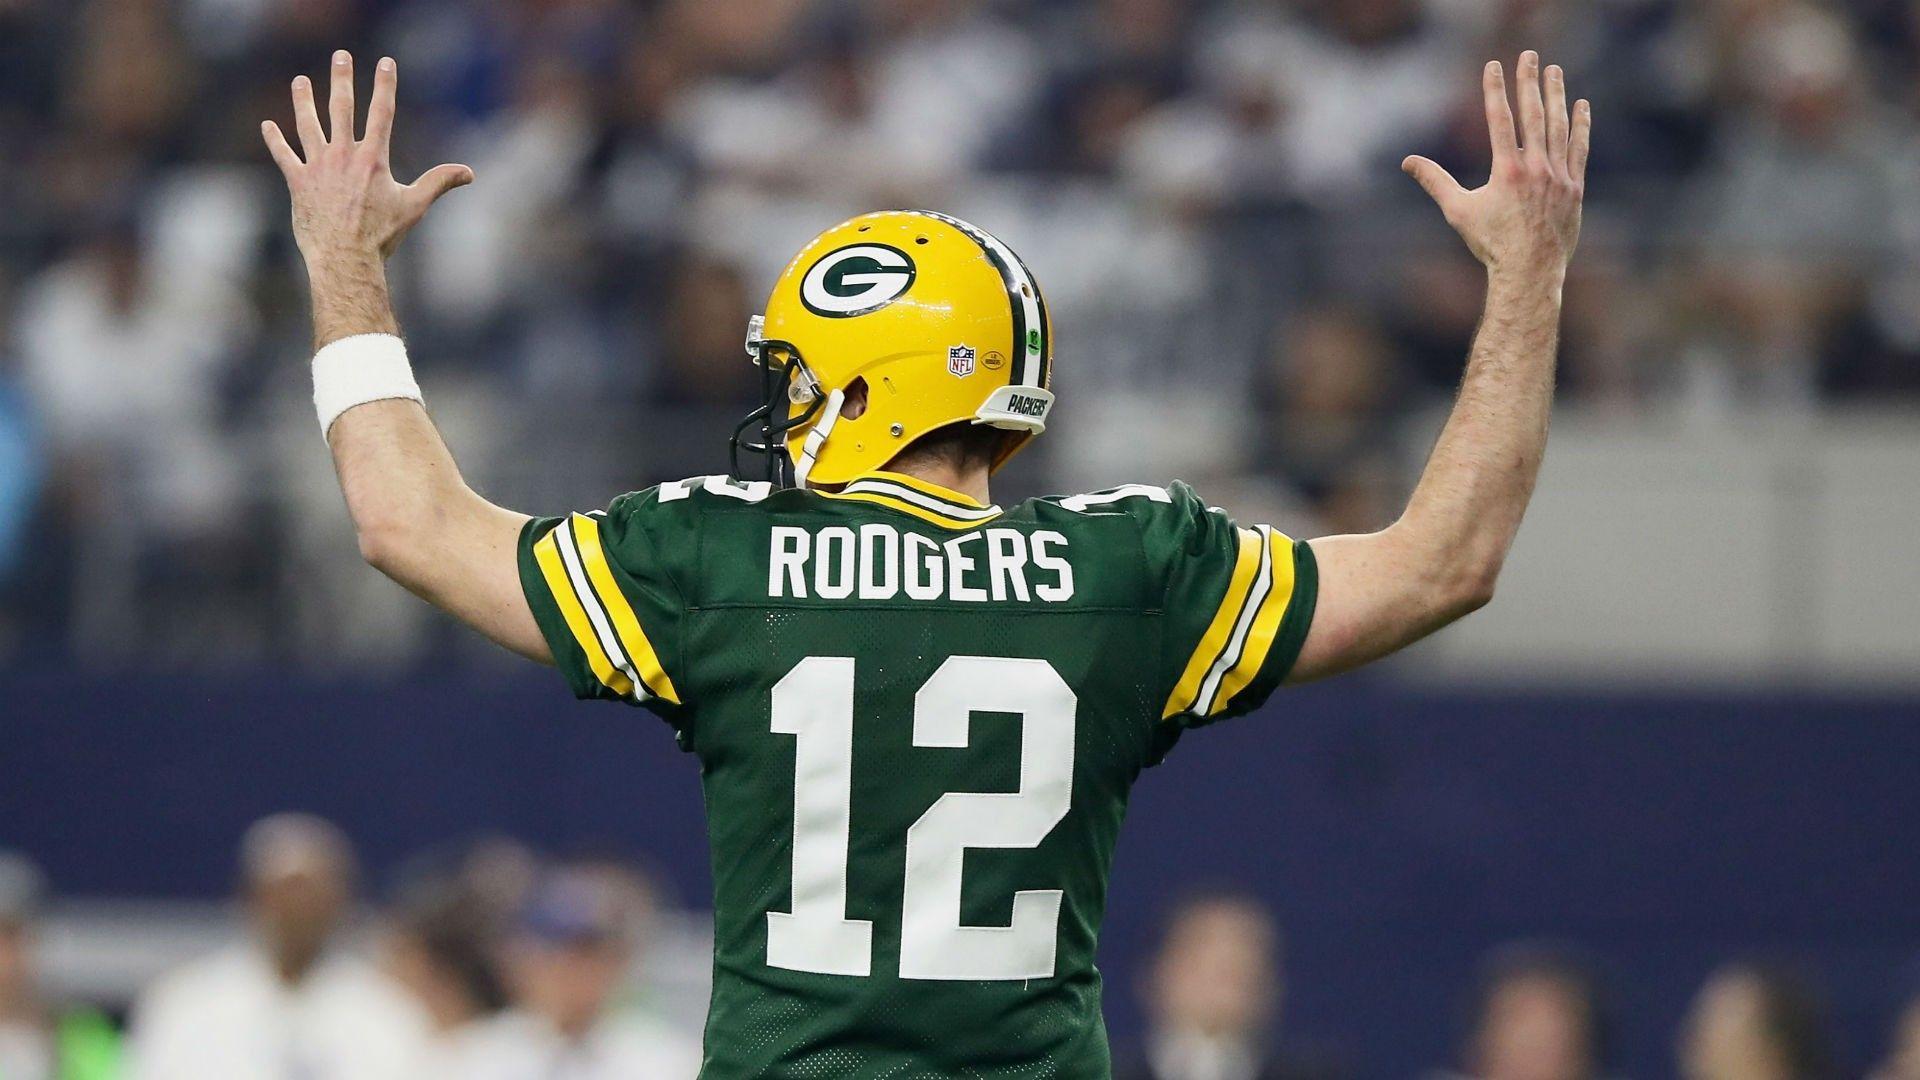 Wallpaper HD Aaron Rodgers. Packers cowboys, Fantasy